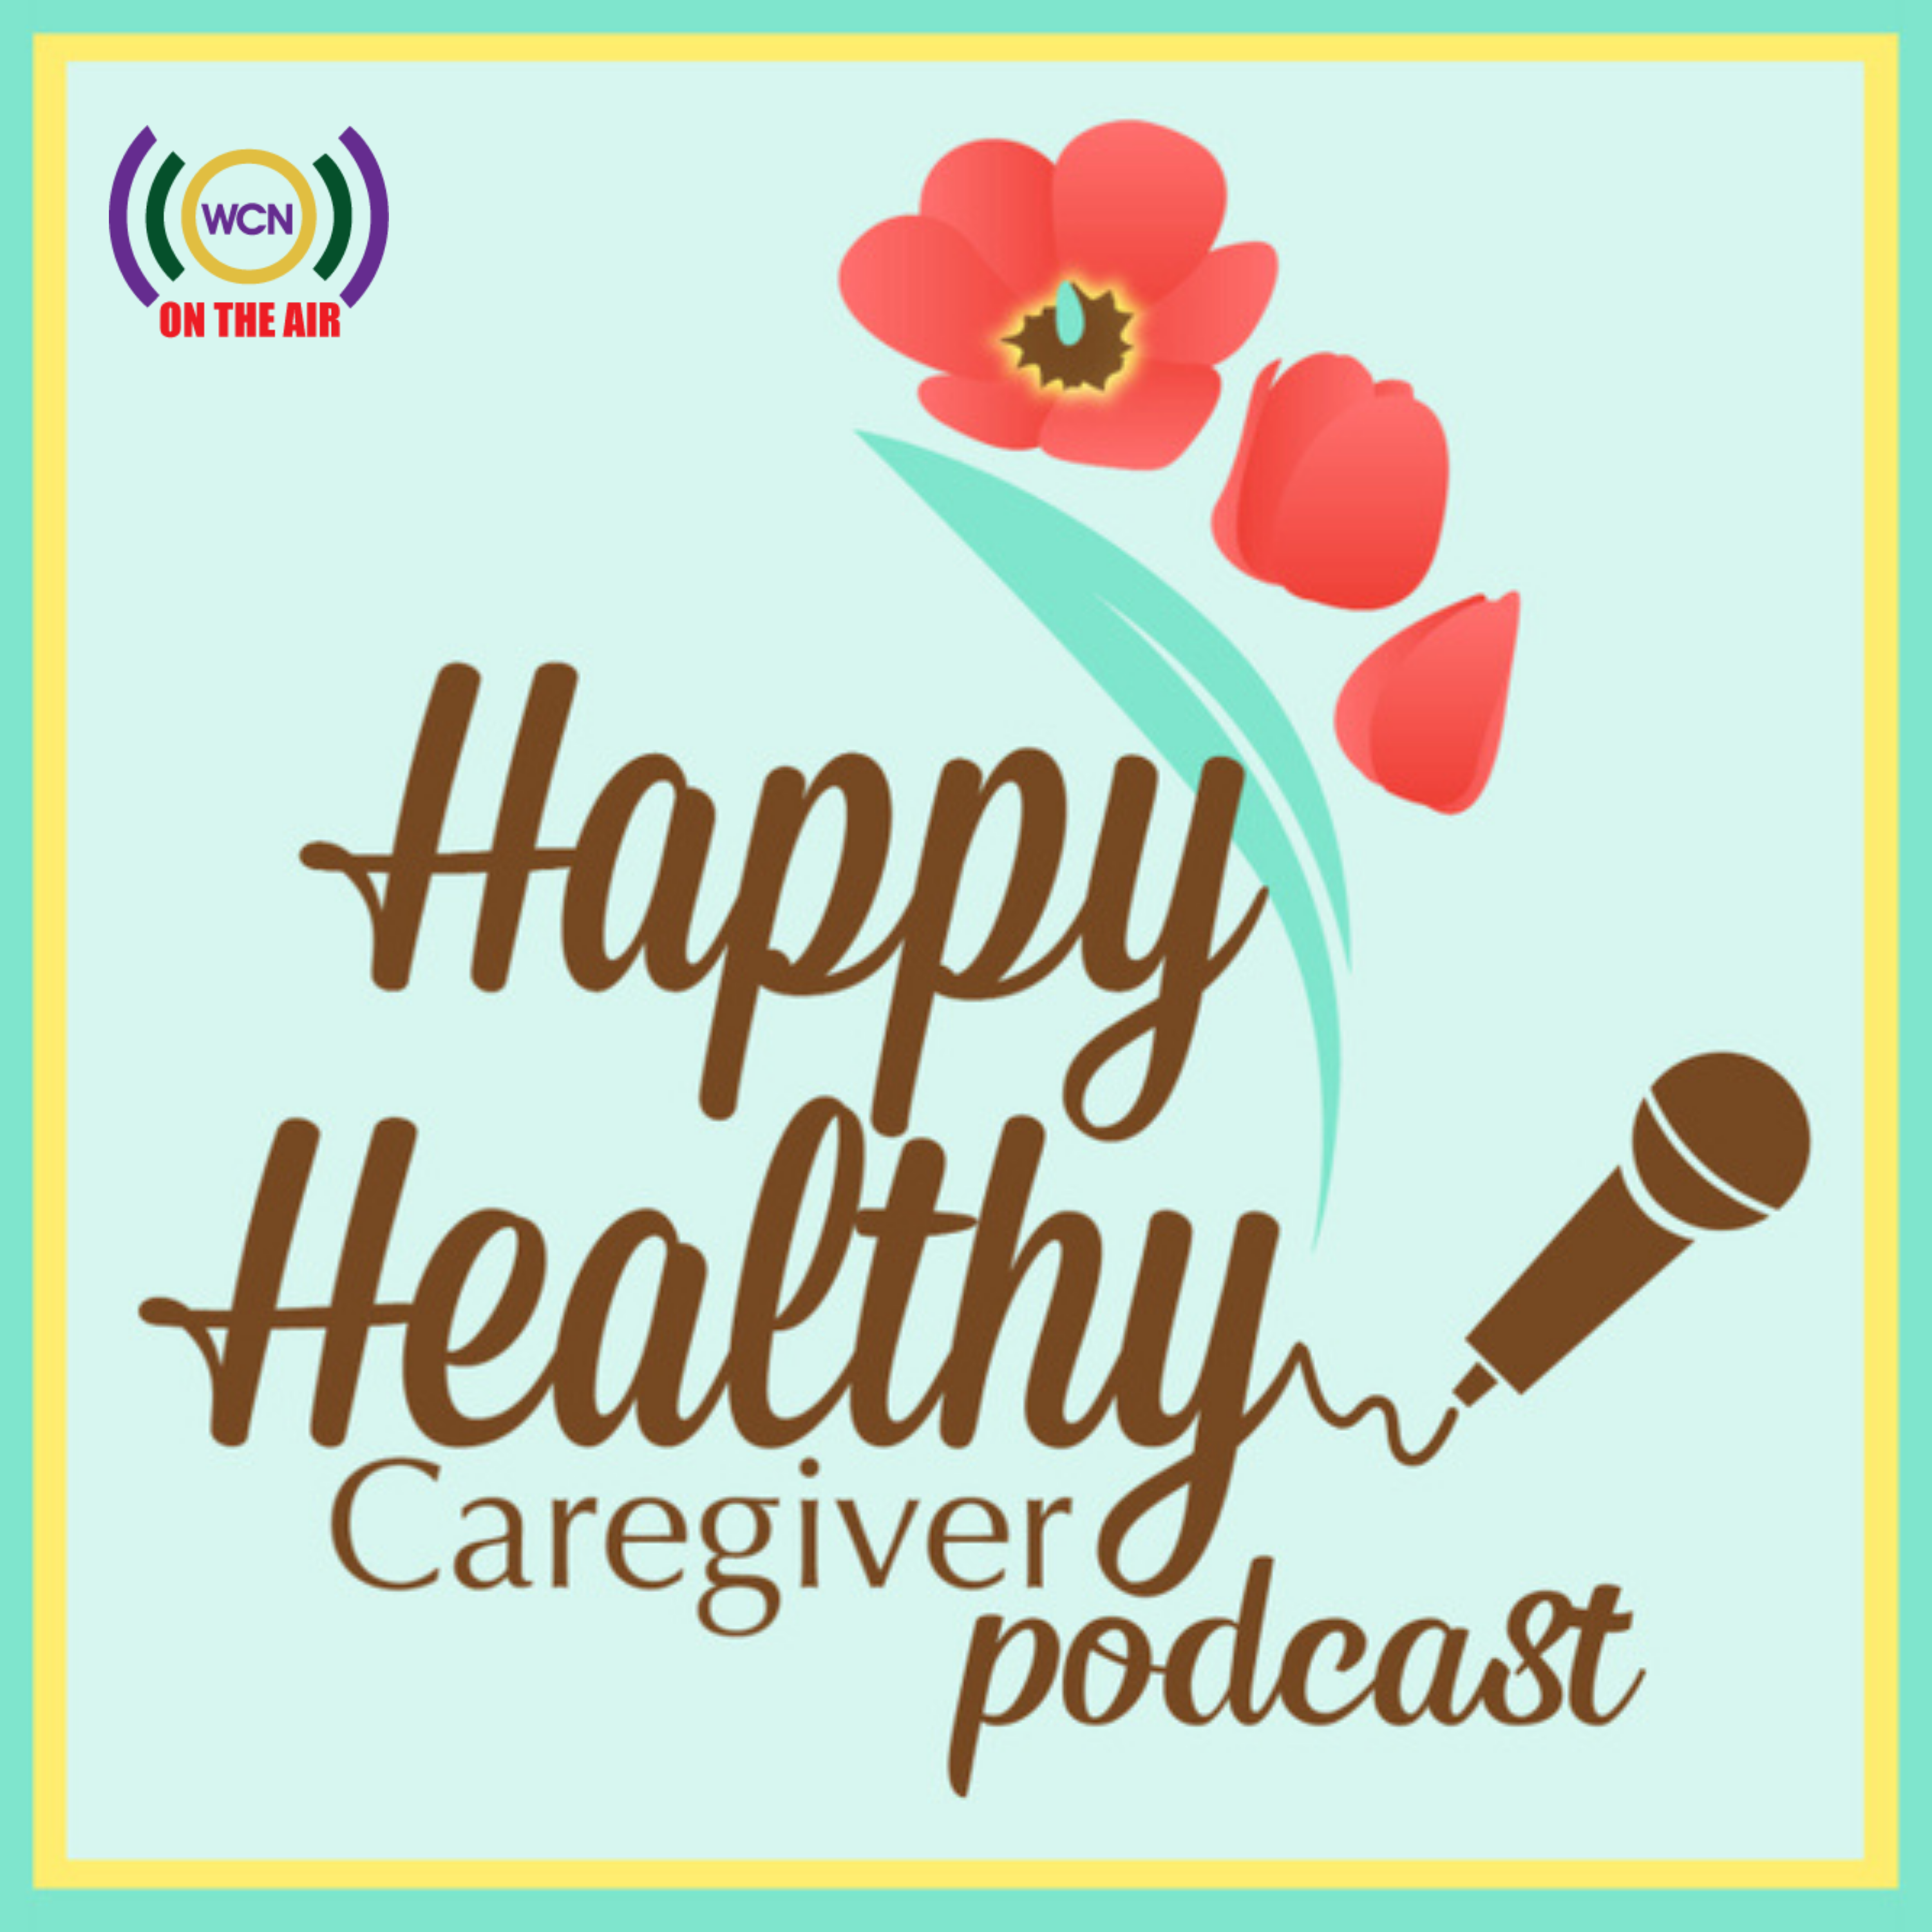 https://thewholecarenetwork.com/wp-content/uploads/2022/03/Happy-Healthy-Caregiver-Podcast-Cover-WCN-logo-2.png